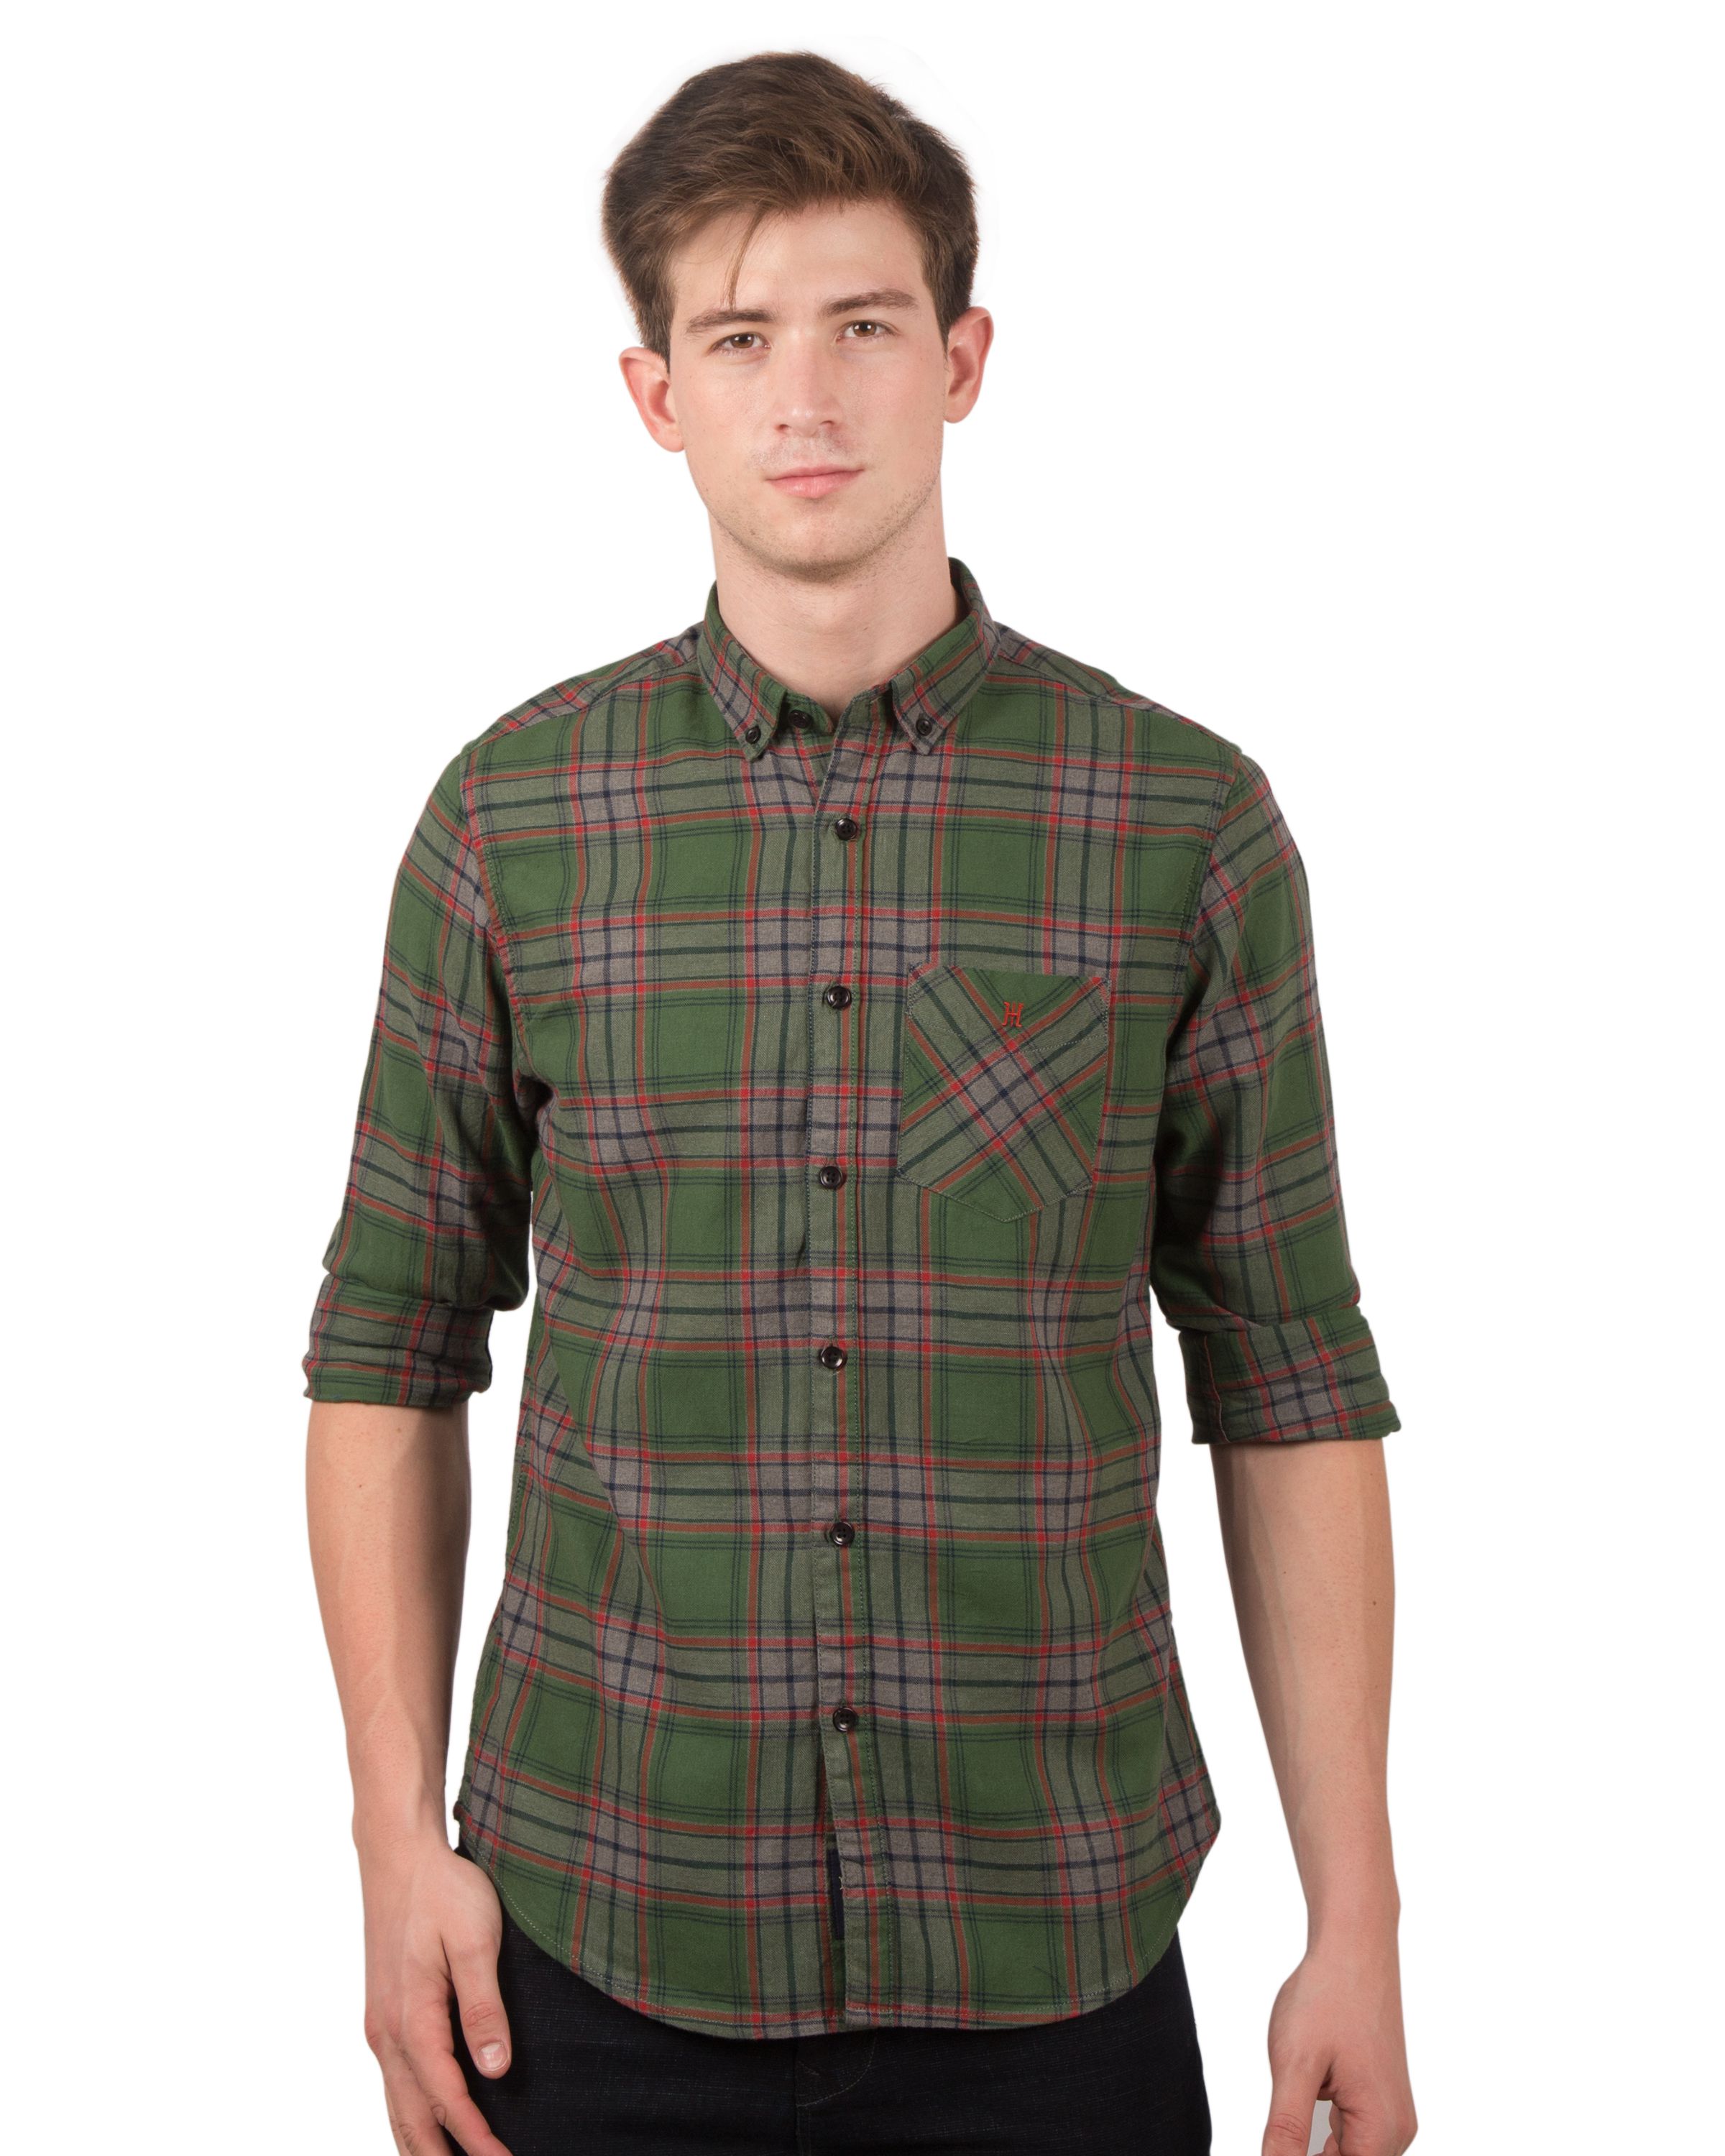 TED HARBOR Cotton Blend Multi Checks Shirt - Buy TED HARBOR Cotton ...